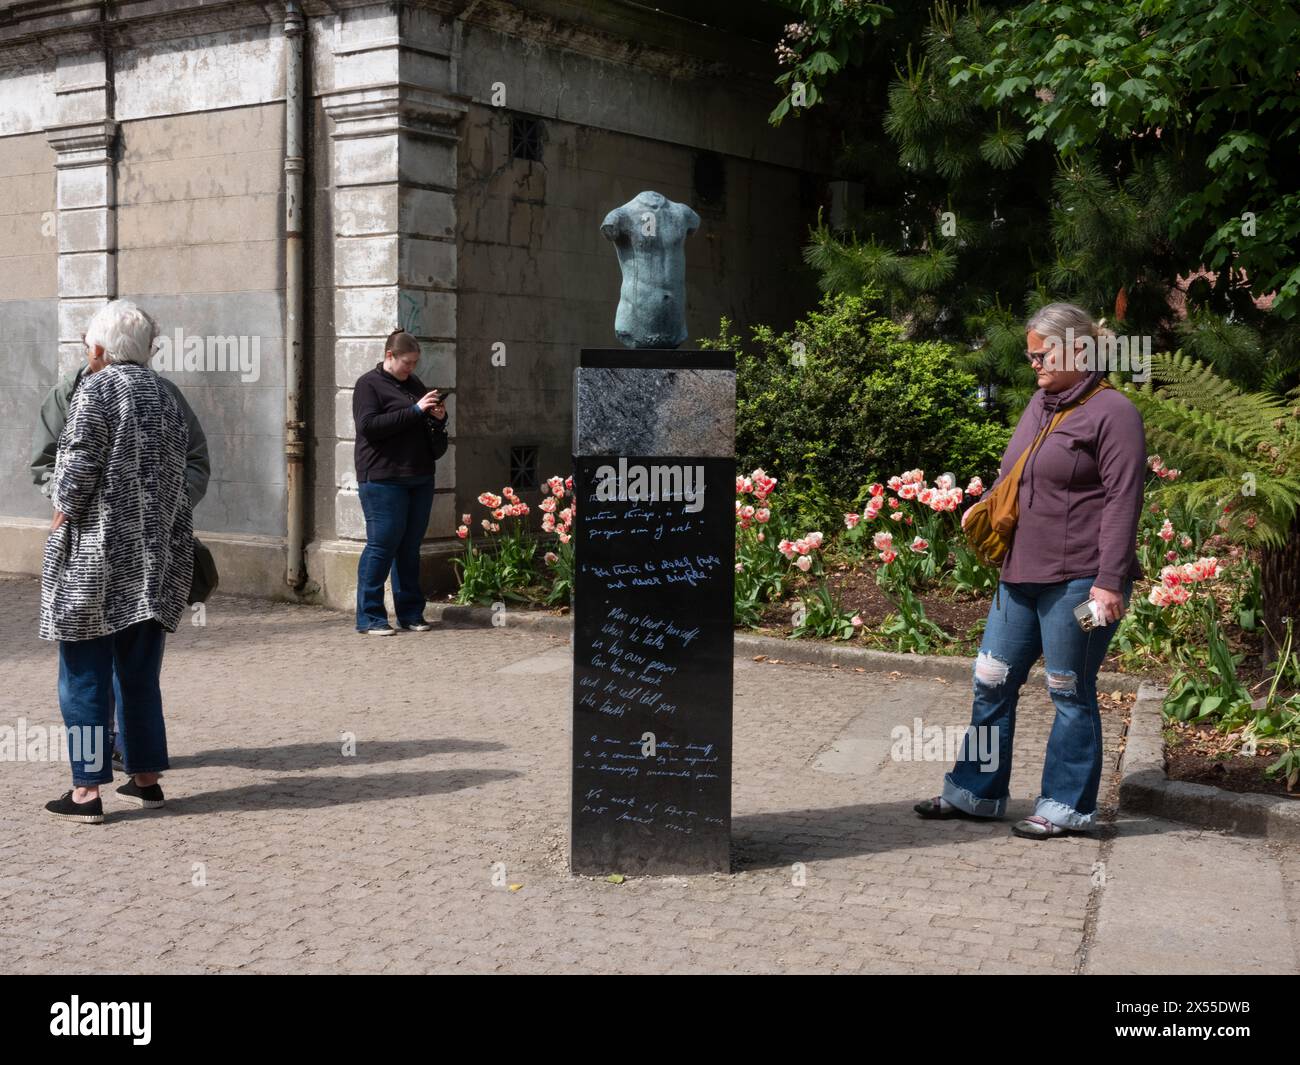 Sculptures dedicated to the legacy of Oscar Wilde in Merrion Square, Dublin city, Ireland. Stock Photo